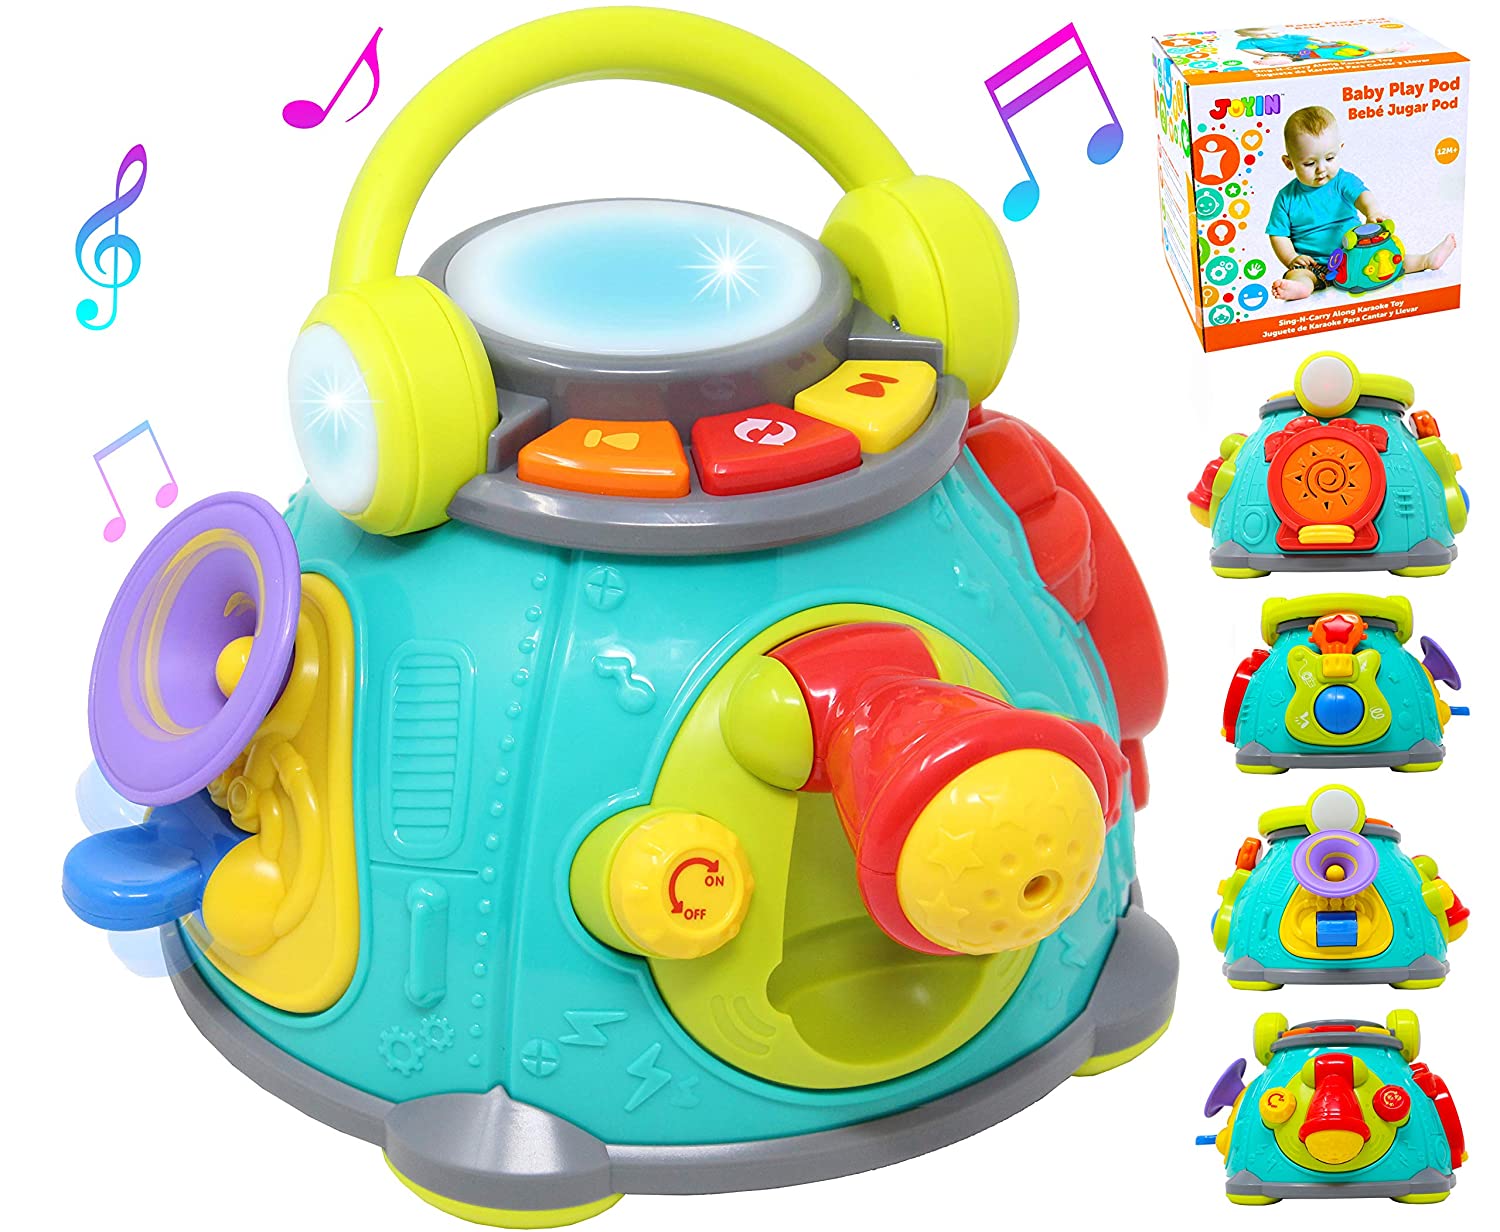 JOYIN Musical Activity Cube Play Center Baby Toy with LED Light Up for Infants, Toddler Interactive Learning Development, Singing Sensory, Rhythm Gifts and Children Holiday Toy Gift.